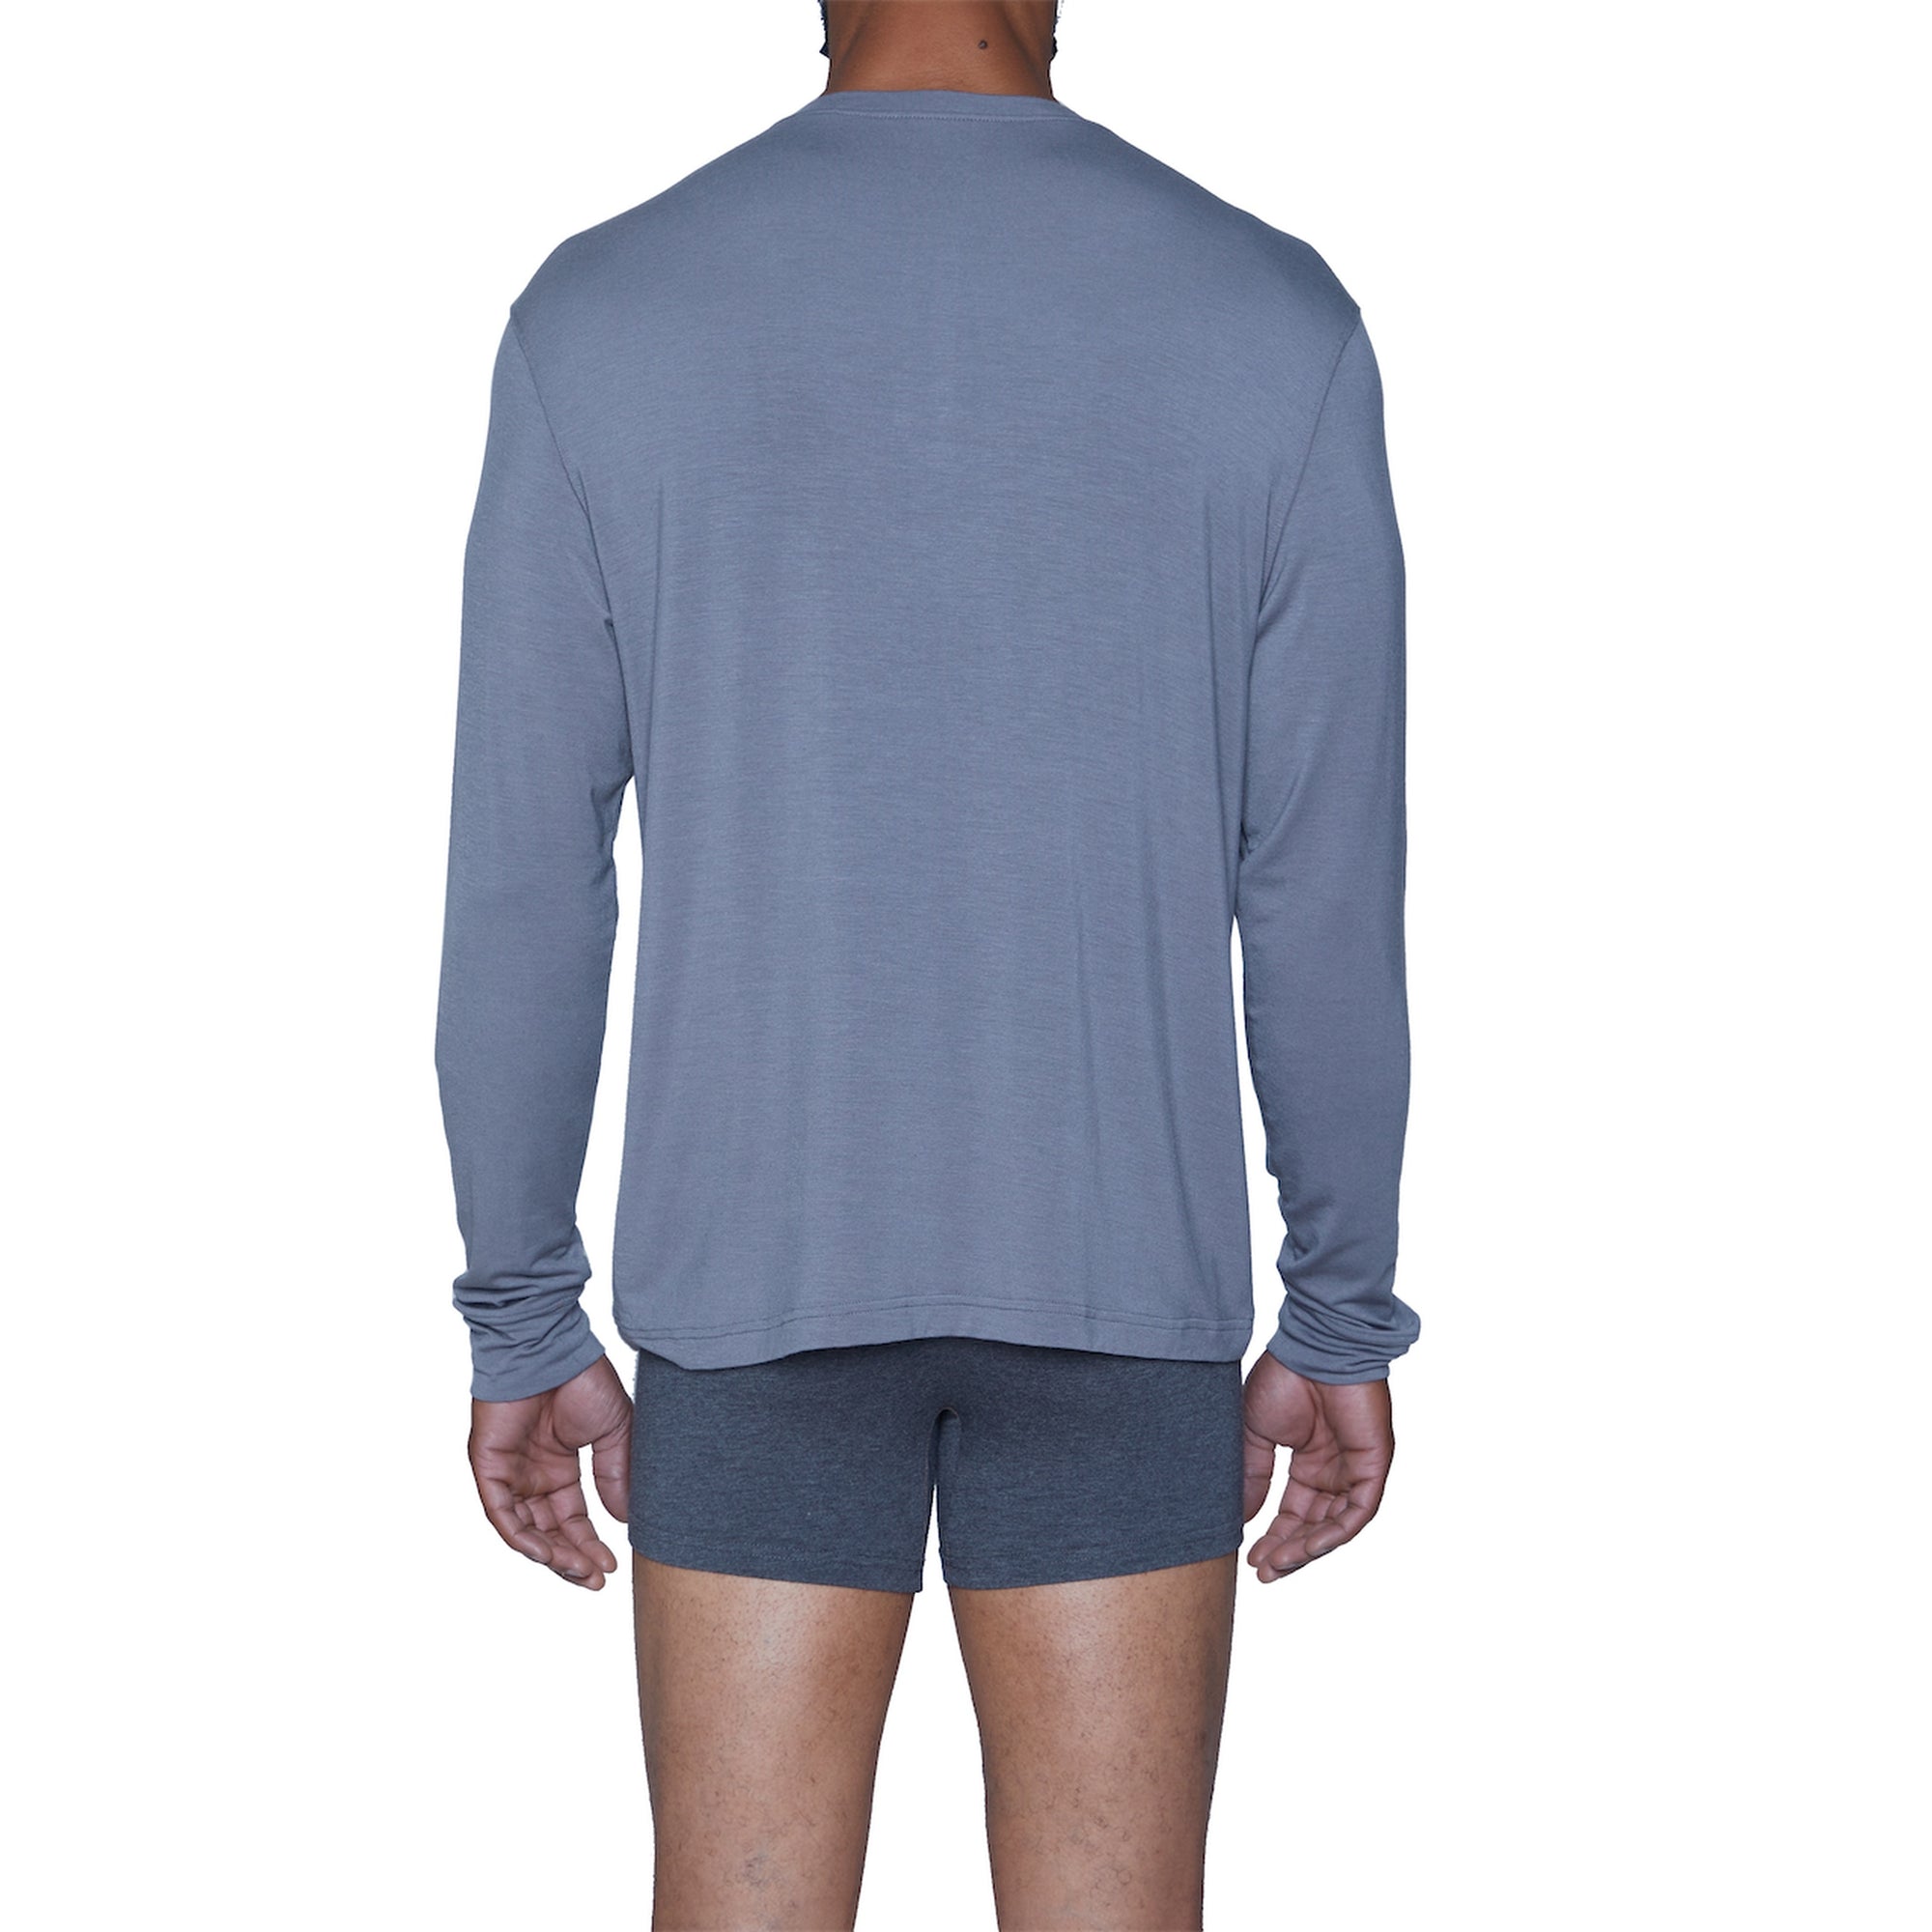 LUXE Cashmere Blend Henley Lounge Shirt in Pewter by Wood Underwear